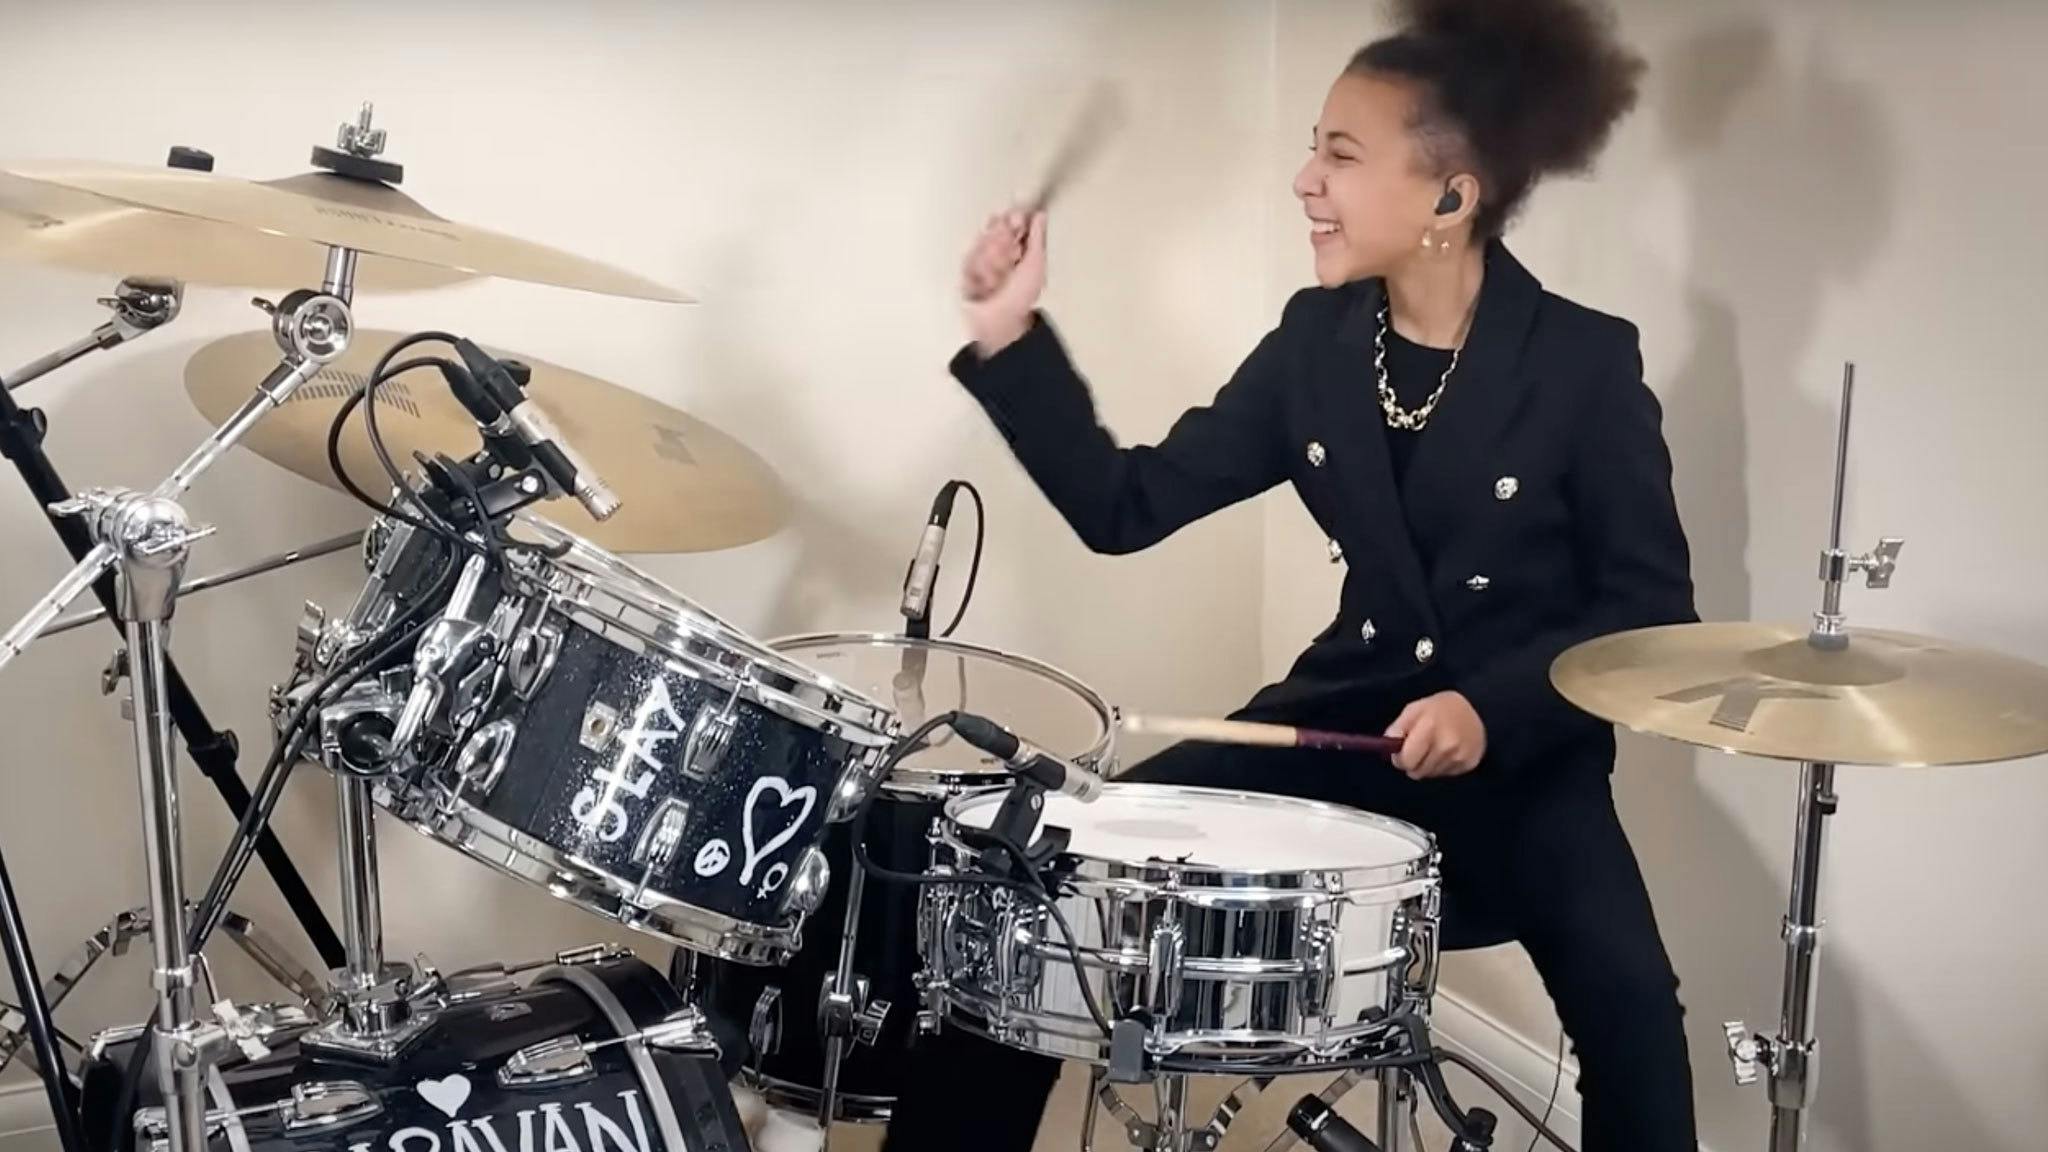 Watch Nandi Bushell’s “most difficult drum cover” ever